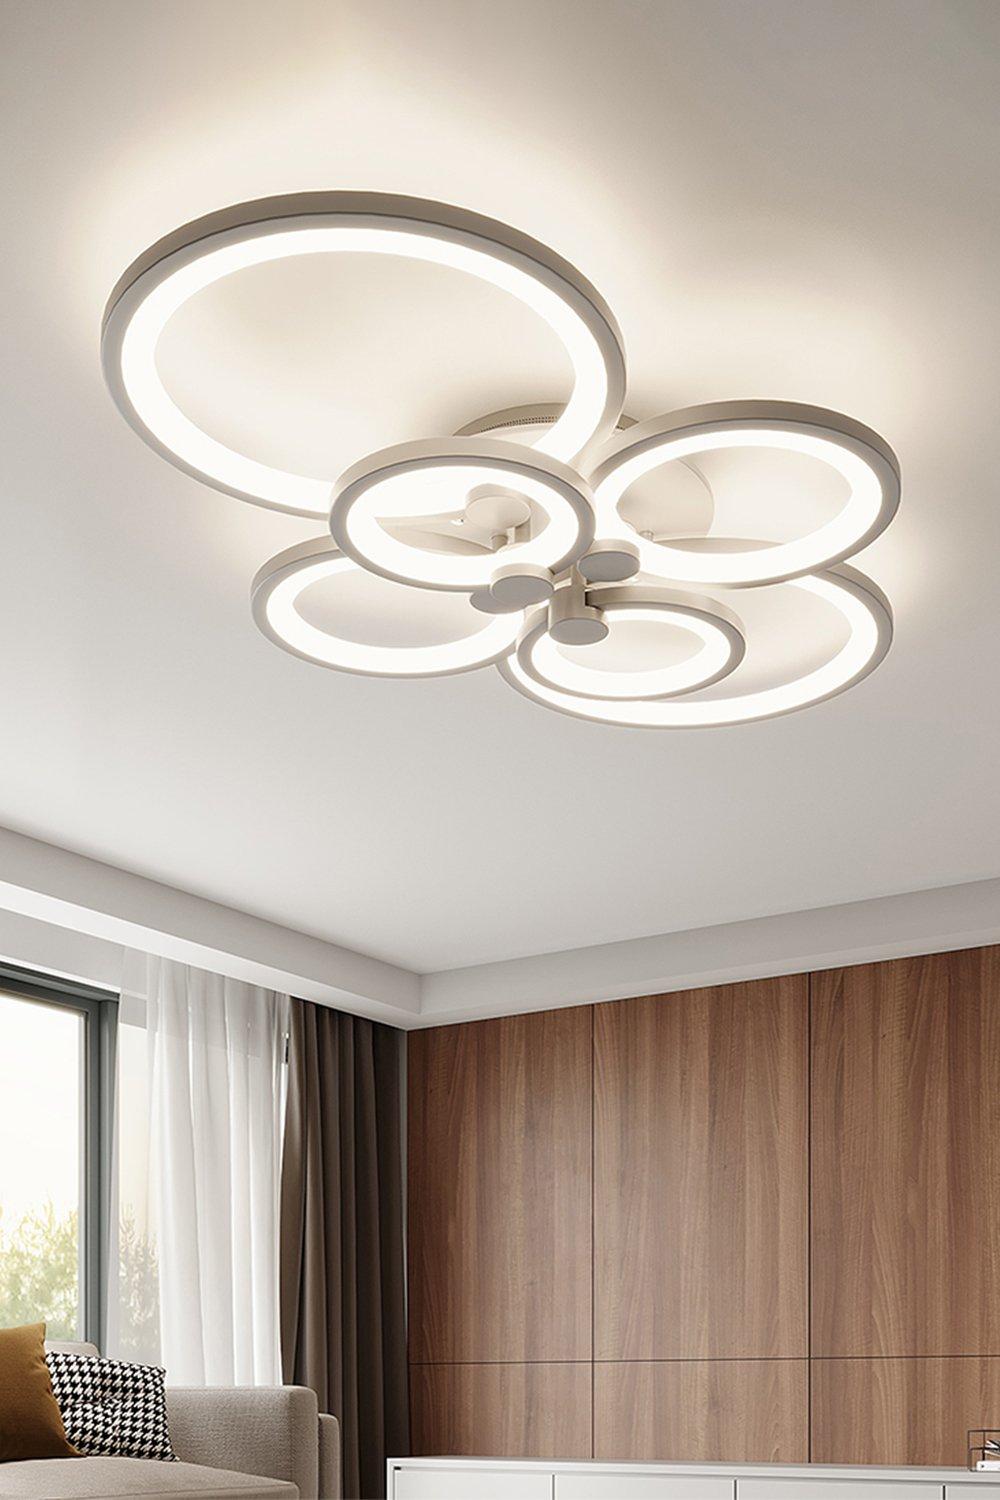 Circular LED Dimmable Semi Flush Ceiling Light with Remote Control